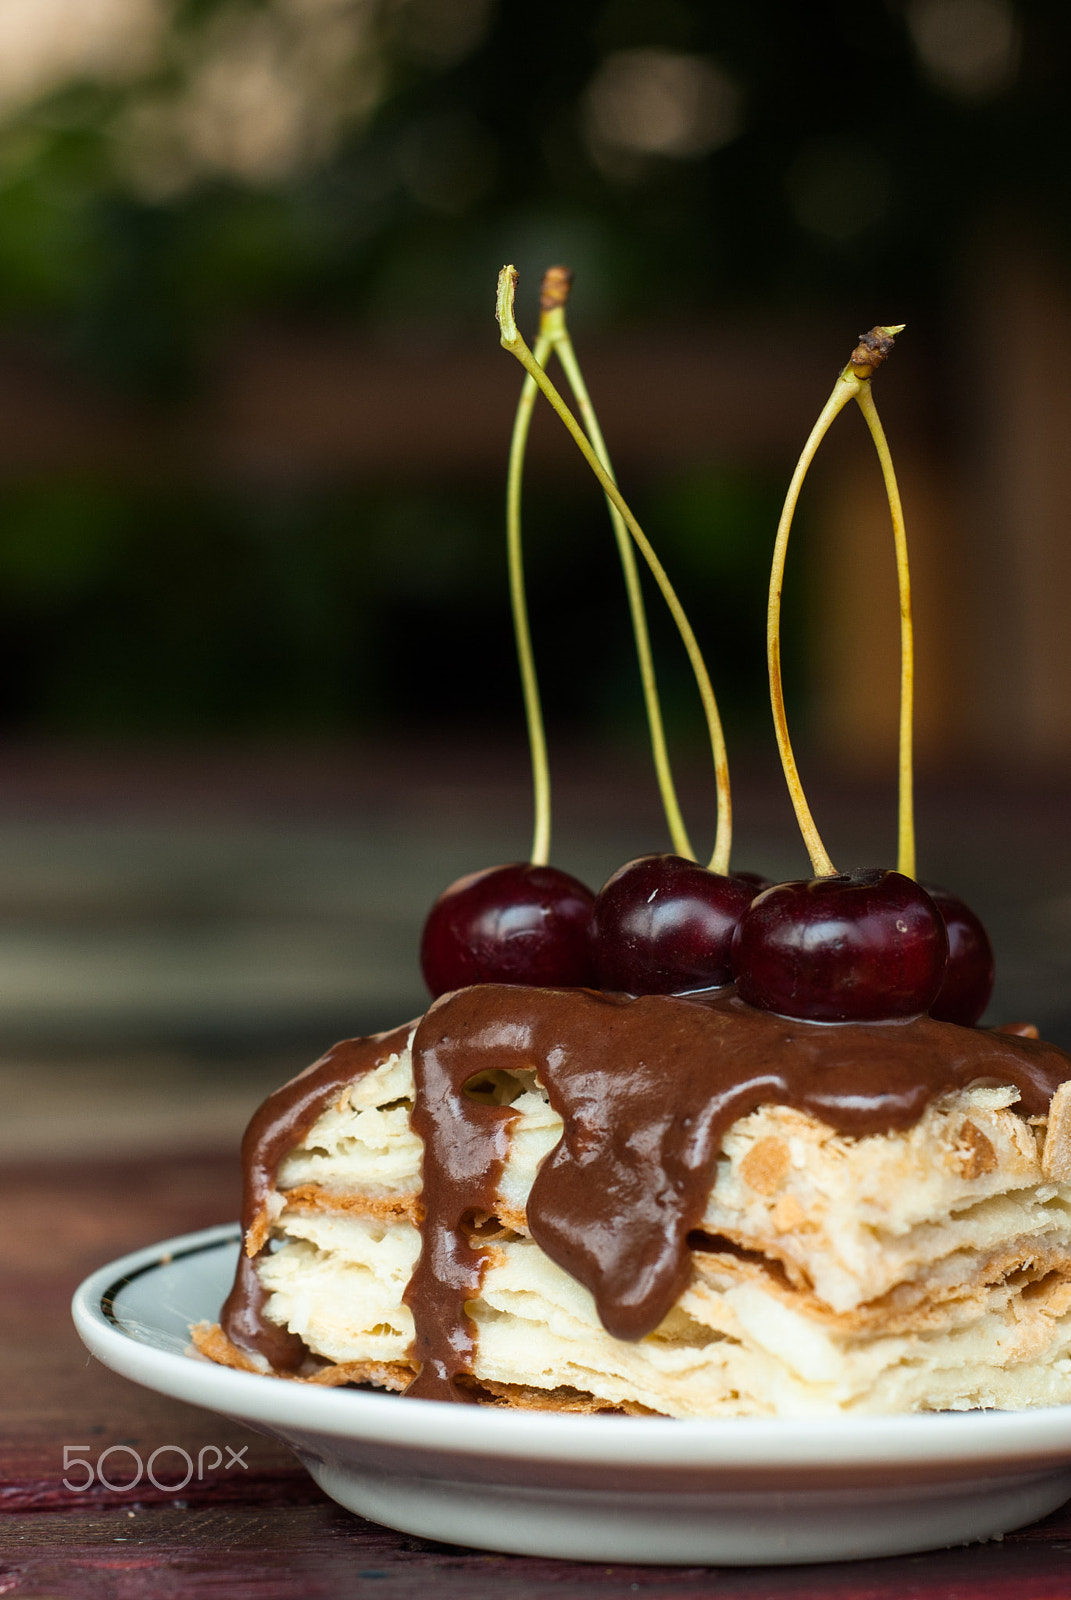 Nikon D80 + AF Nikkor 50mm f/1.8 N sample photo. Piece of cake with chocolate icing and cherries, puff pastry napoleon  on a white plate, photography